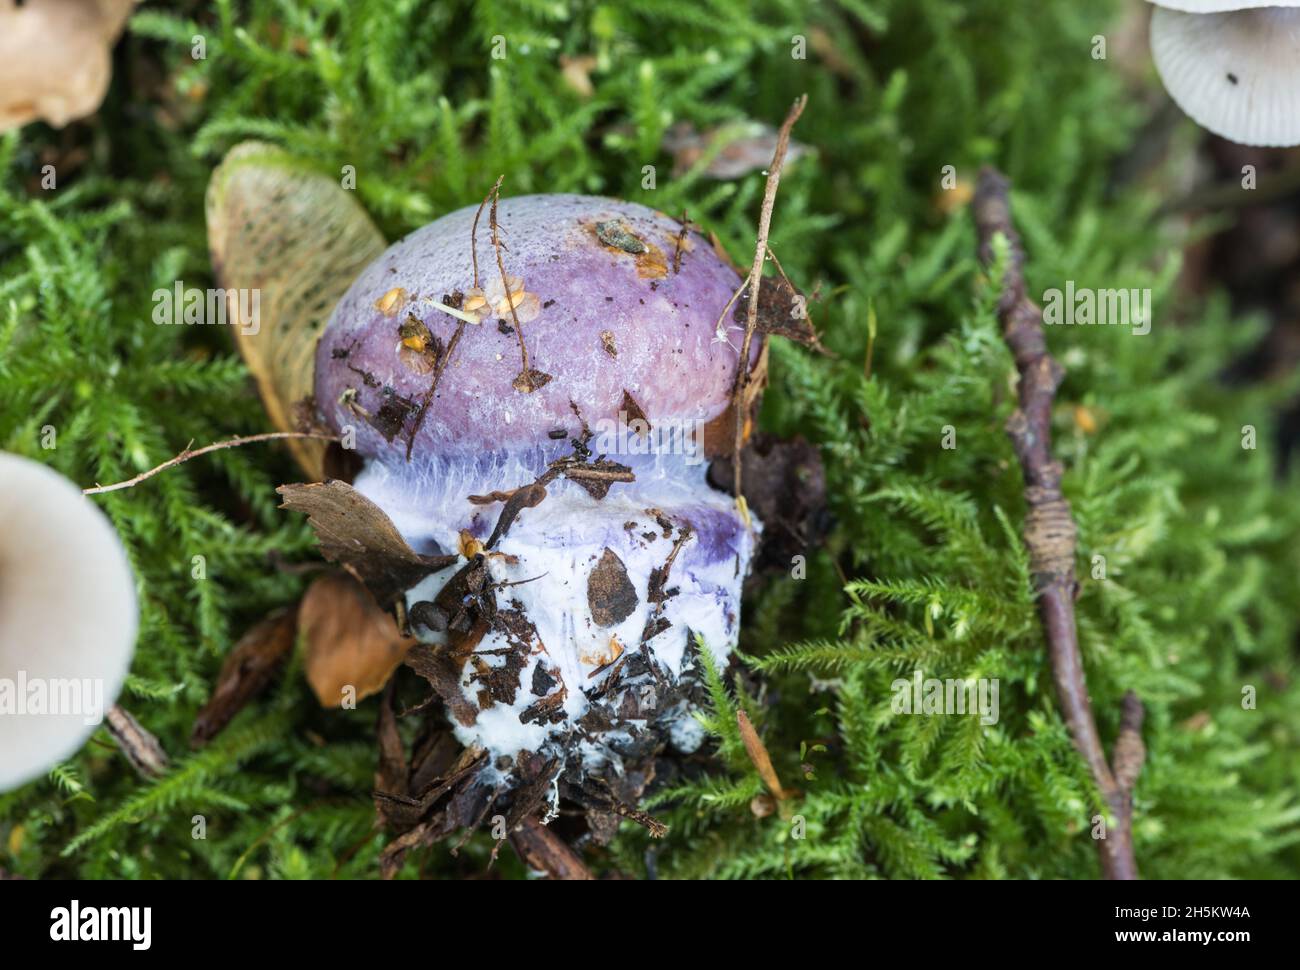 An emerging fungus with a sticky cap, certainly a Cortinarius sp. and probably Cortinarius caerulescens or possibly C.violaceus Stock Photo